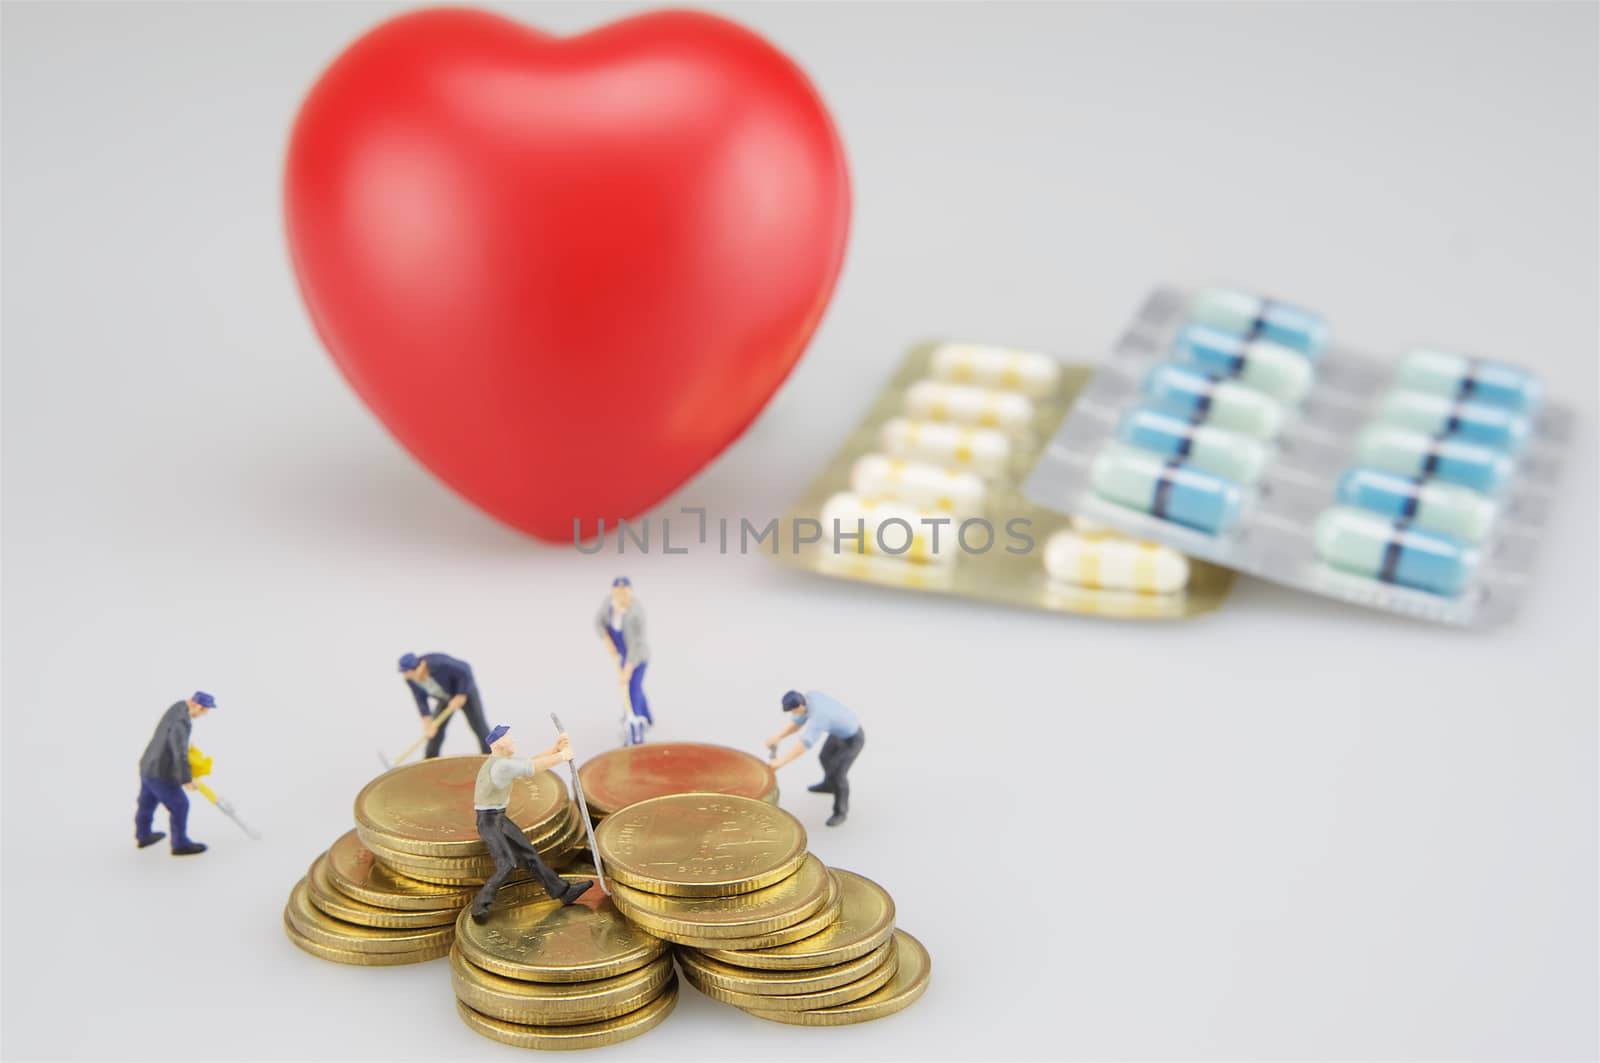 Pile of coins with miniature people, packing of medicine and red heart.